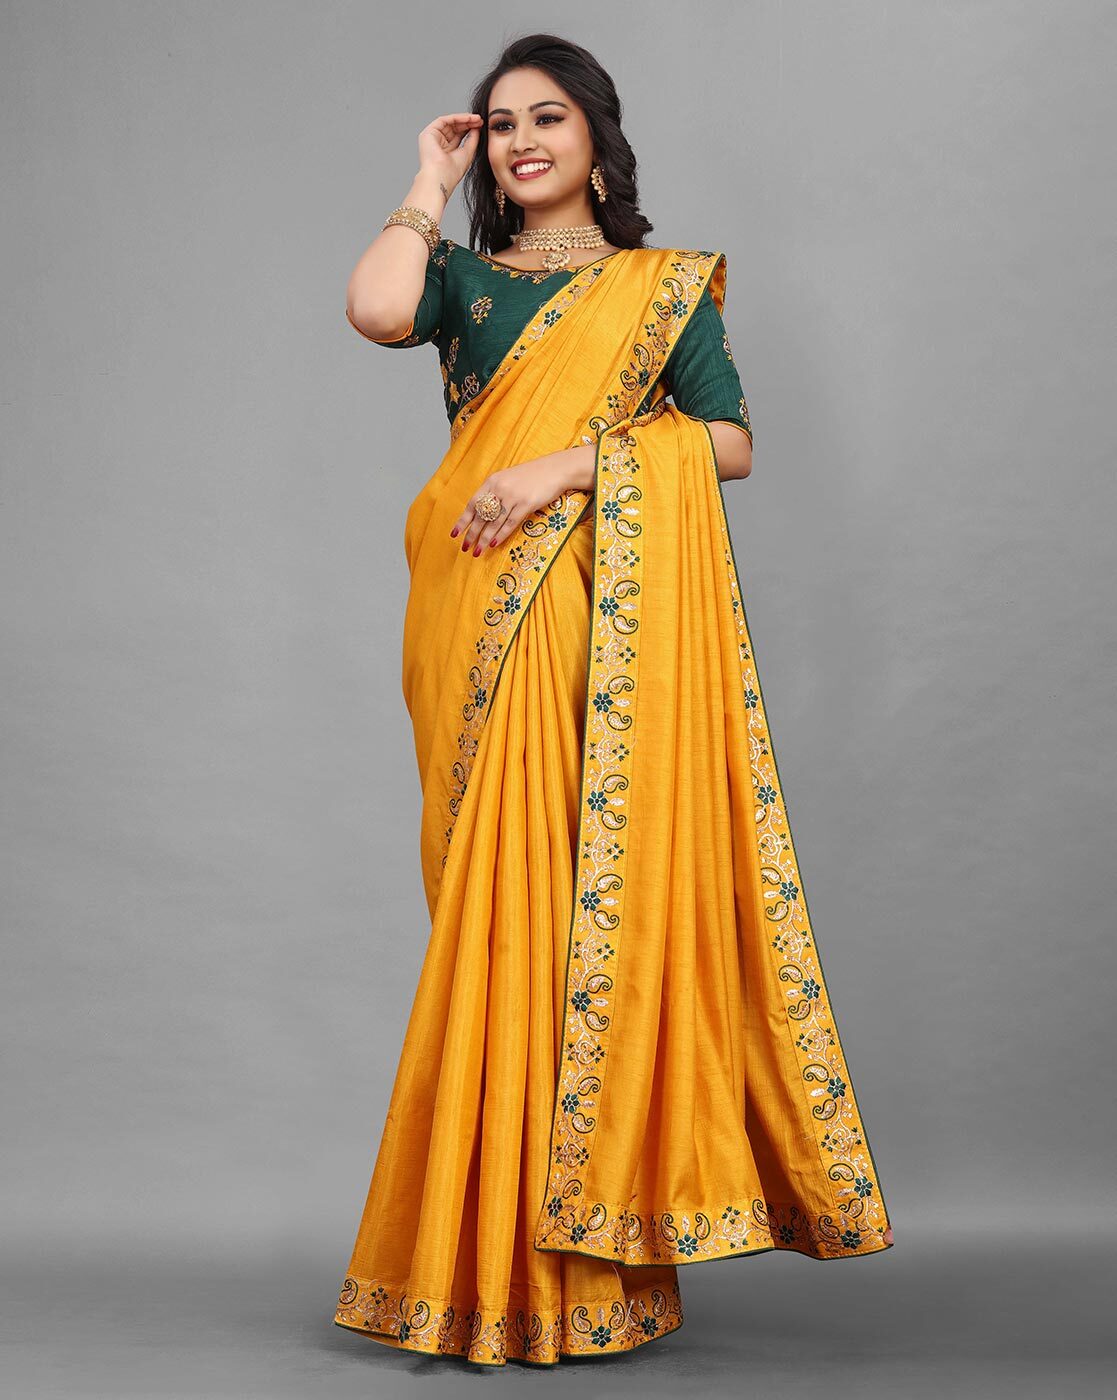 Buy Mustard Yellow Saree With Gold Border Online in the USA @Mohey - Saree  for Women